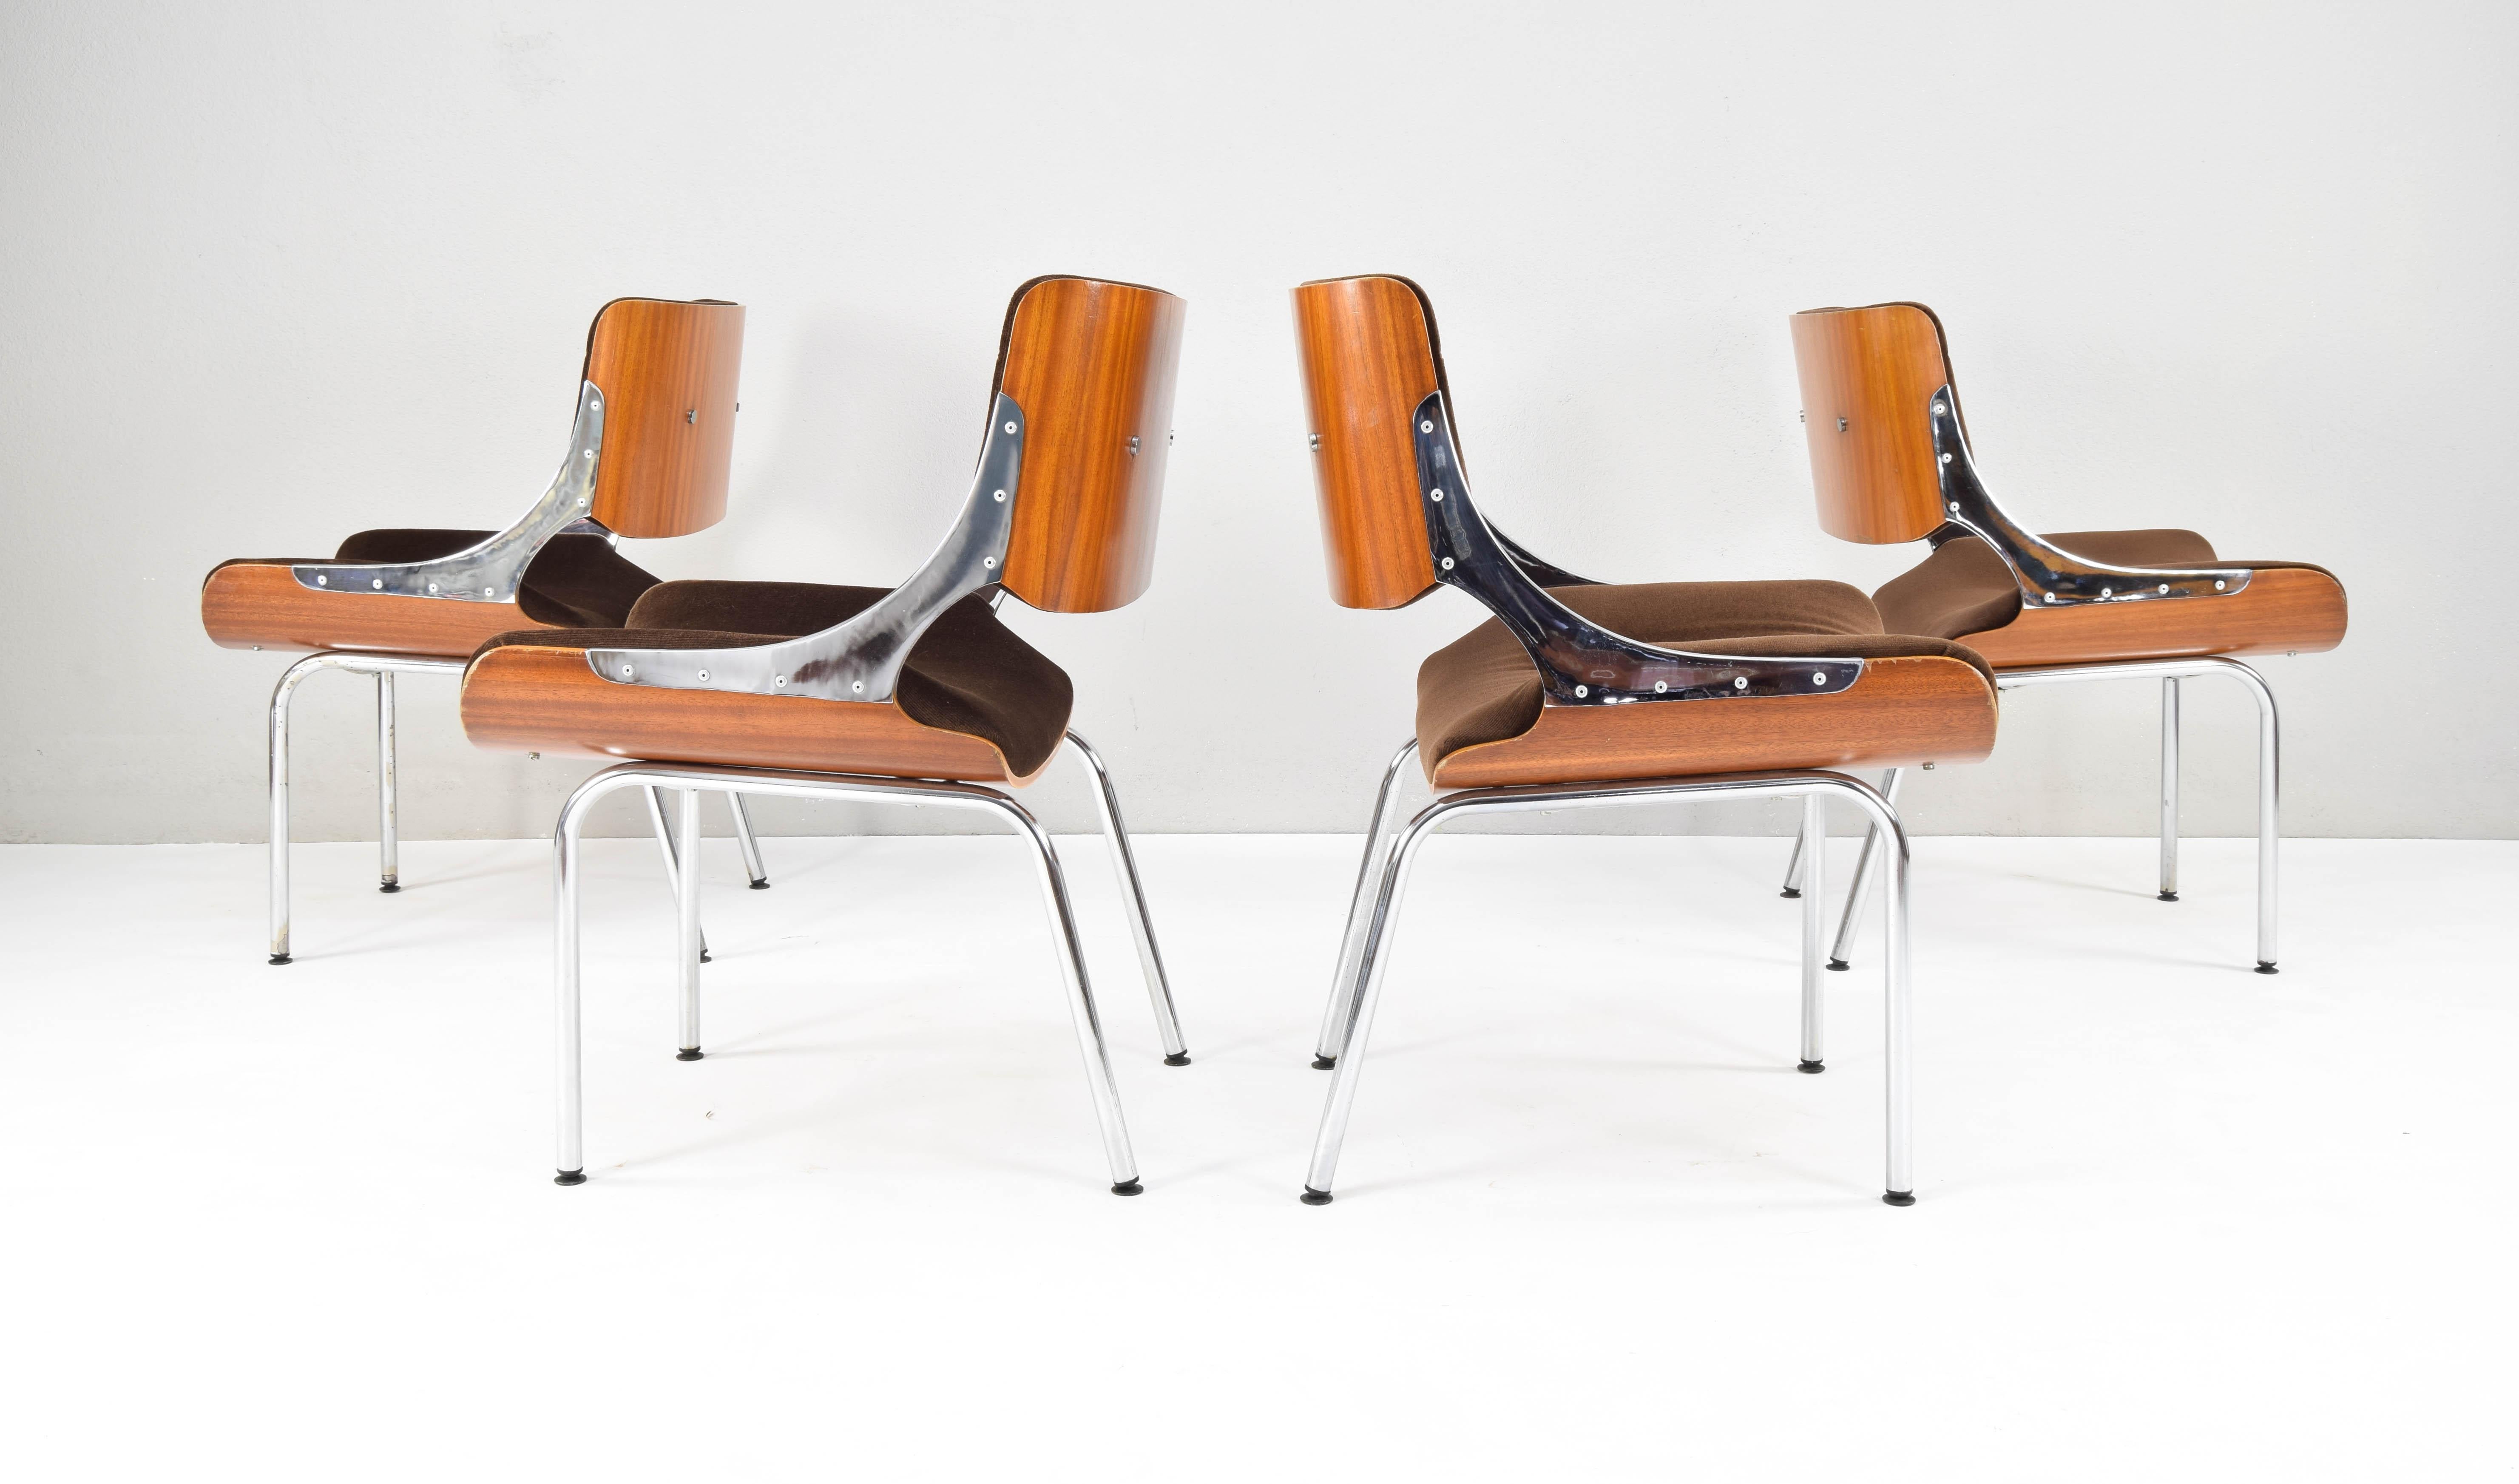 Set of four Danish chairs from the 1960s.
Back and seat in laminated teak wood and upholstered in chocolate brown corduroy. Each backrest is joined to the seat by a piece of chromed steel on each side.
This peculiar combination of materials and